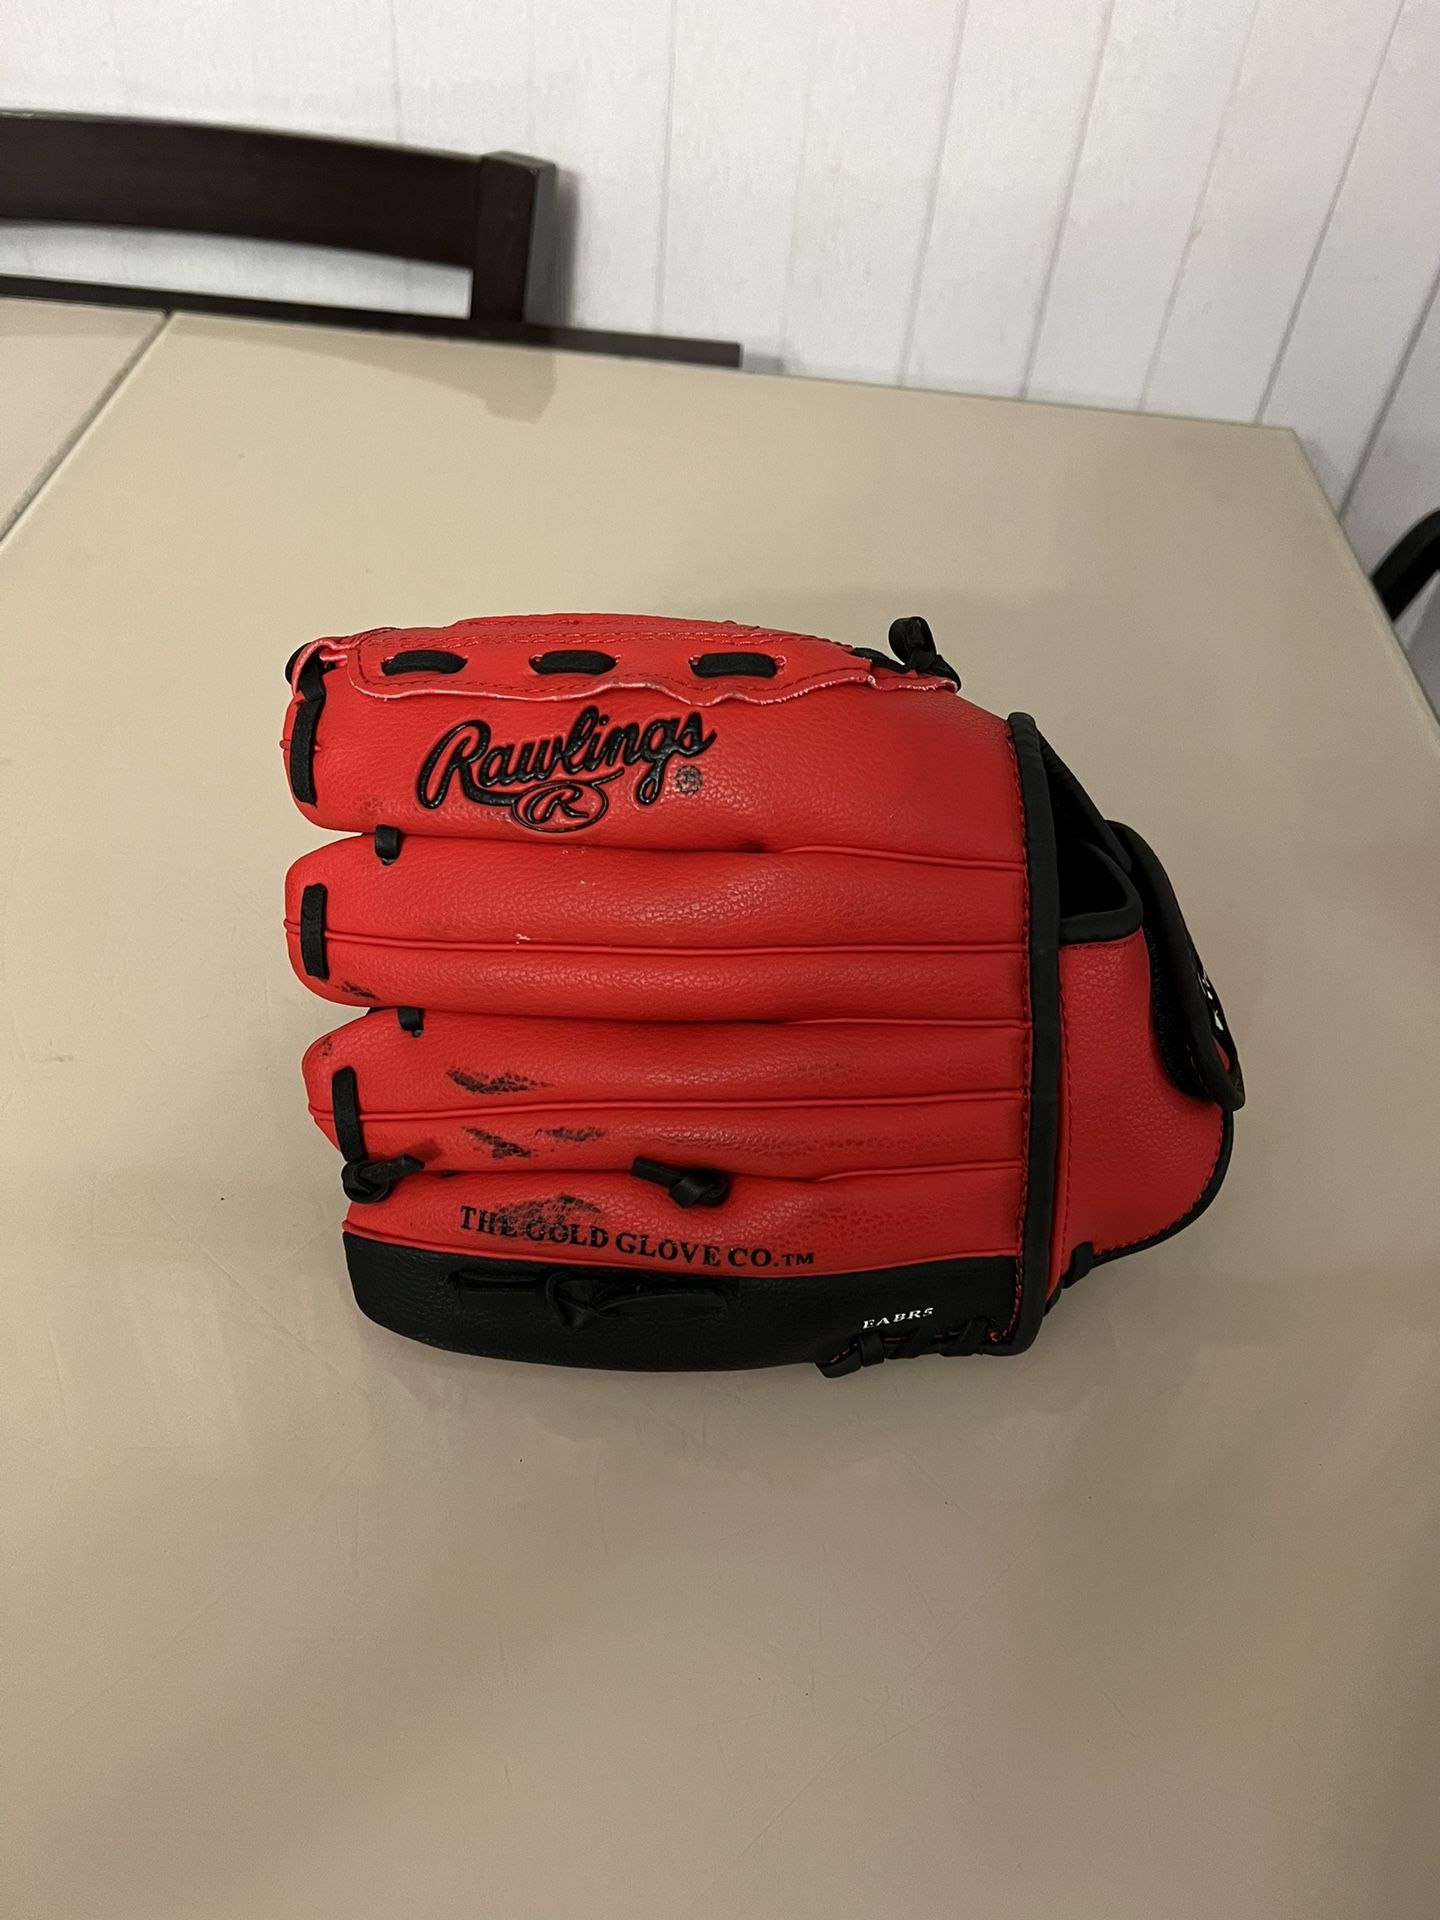 Rawlings Baseball Glove Youth Right Hand Thrower PL110S 11" Players Series EABR5. Pre owned in good cosmetic condition with some minor blemishes. Ther